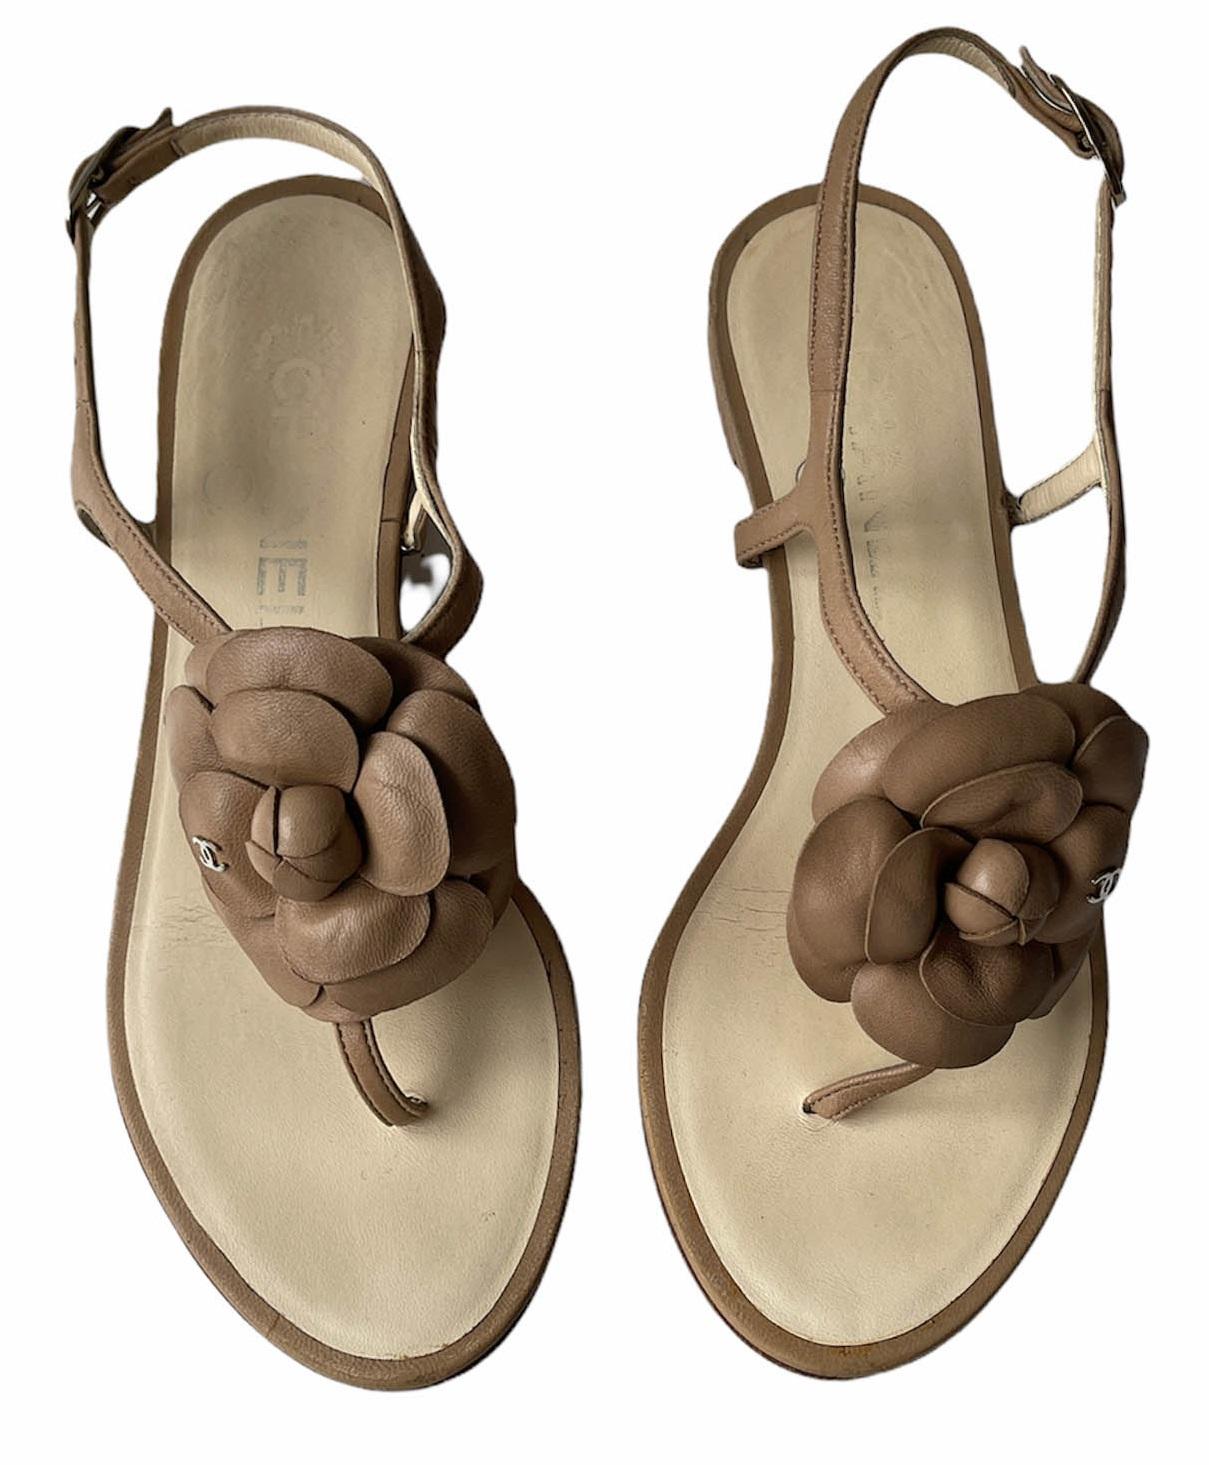 Chanel Beige Leather Camelia CC Thong Sandals sz 35.5

Made In: Italy
Color: Beige
Hardware: Silvertone
Materials: Leather
Closure/Opening: Adjustable buckle
Overall Condition: Very good.  Wear to soles and throughout leather.

Marked Size: 35.5